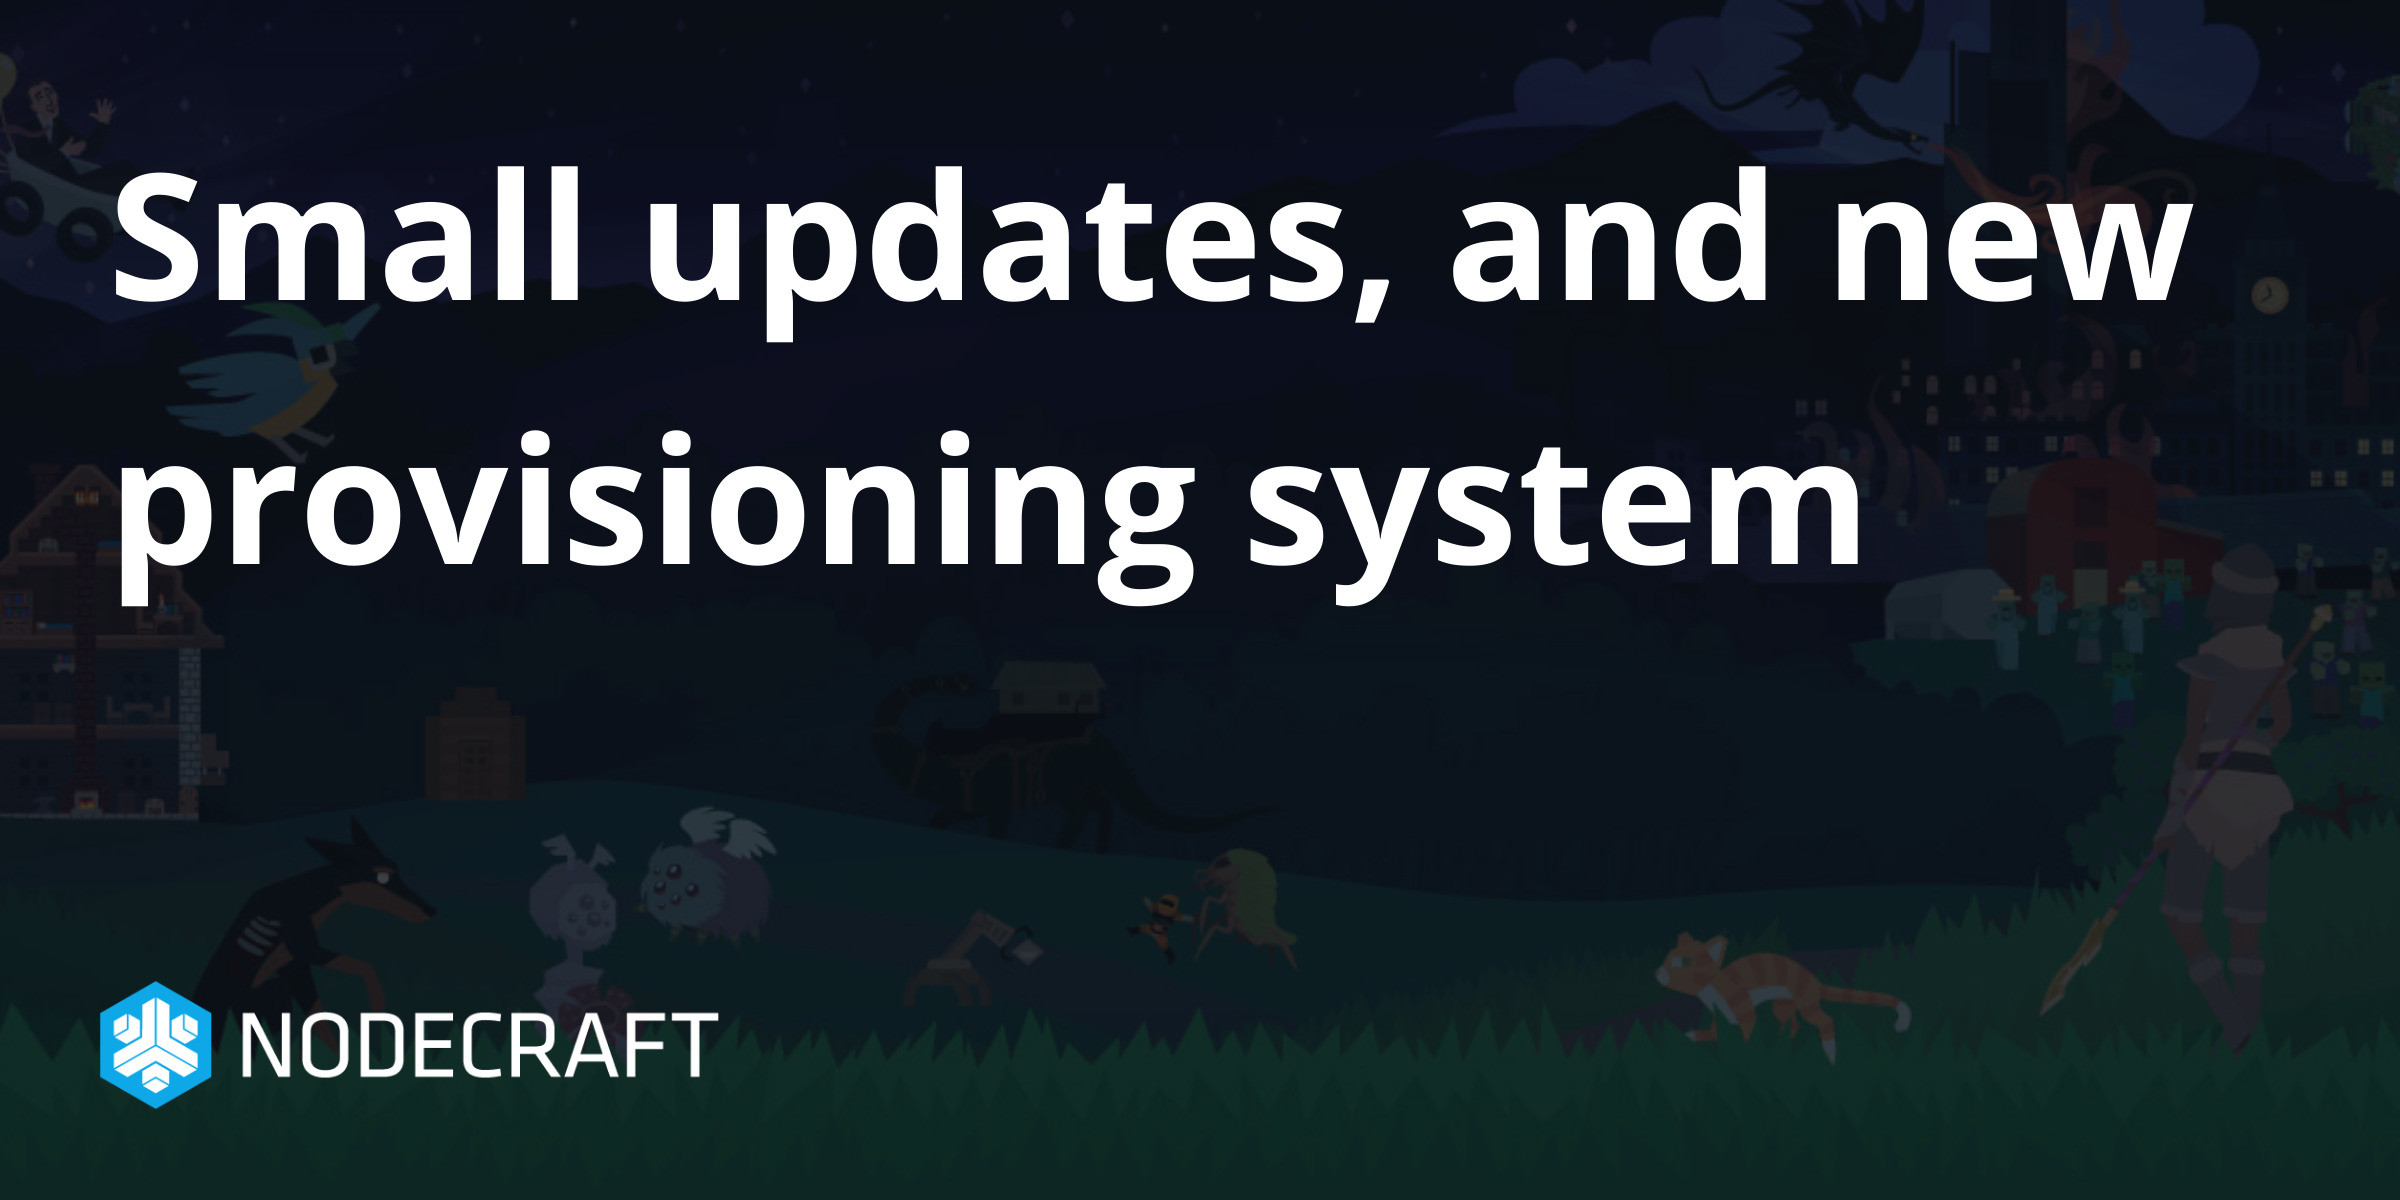 Small updates, and new provisioning system